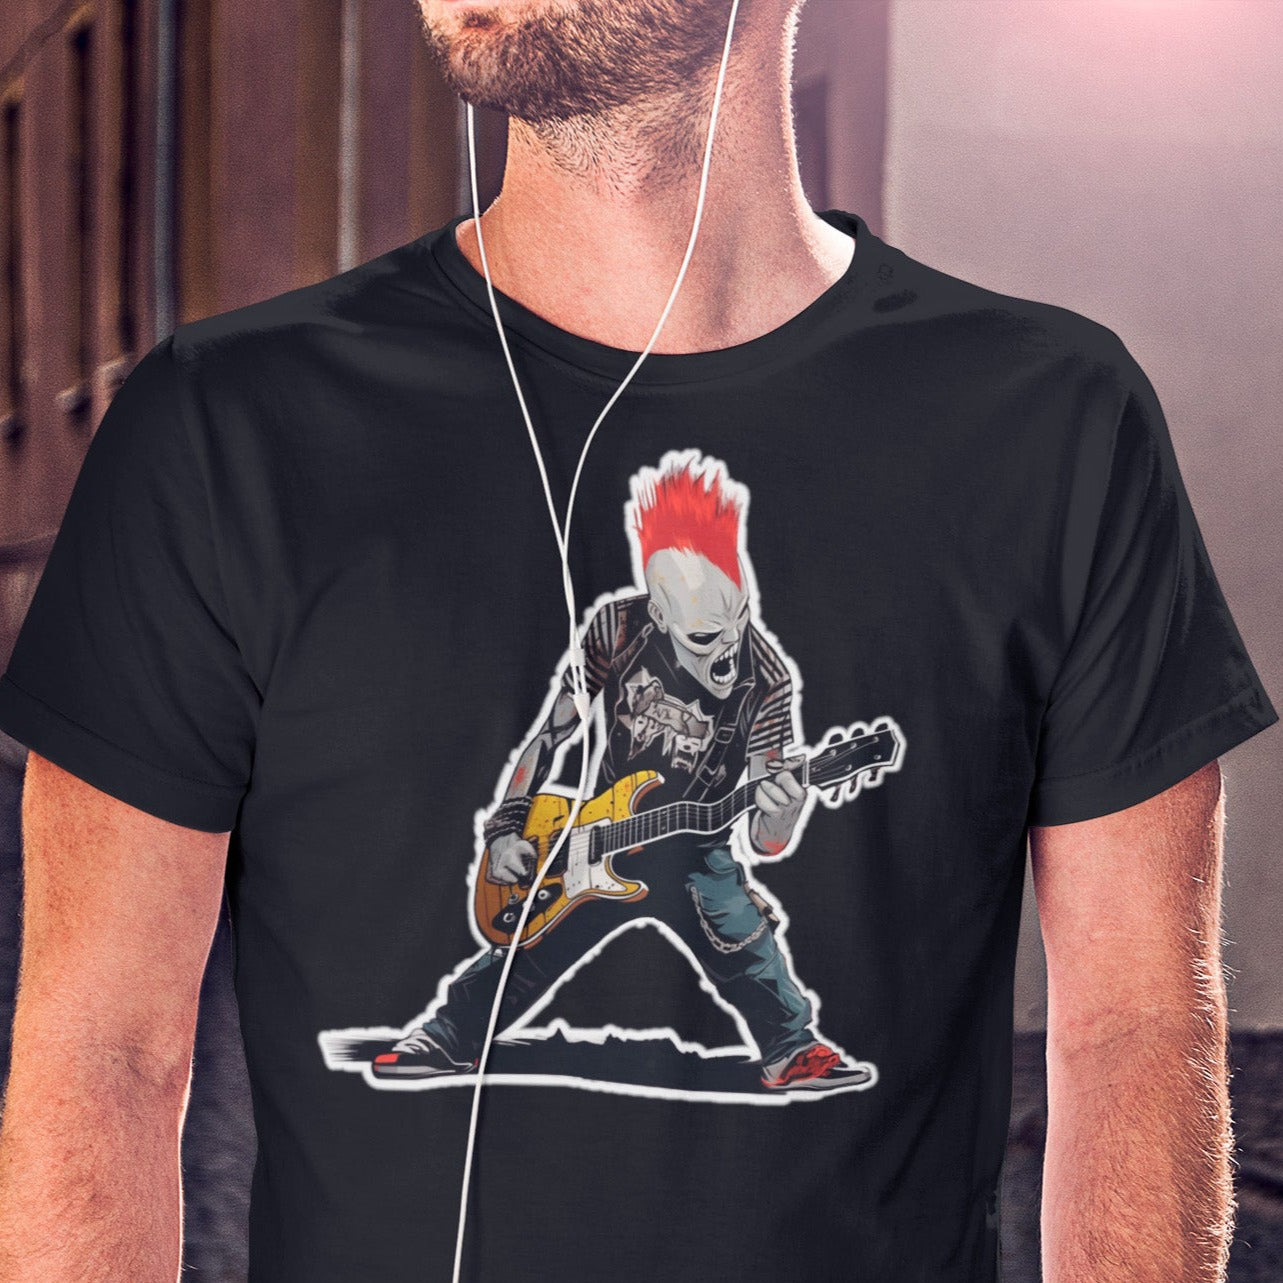 undead-shred-punk-black-t-shirt-mockup-of-a-man-listening-to-music-on-the-street